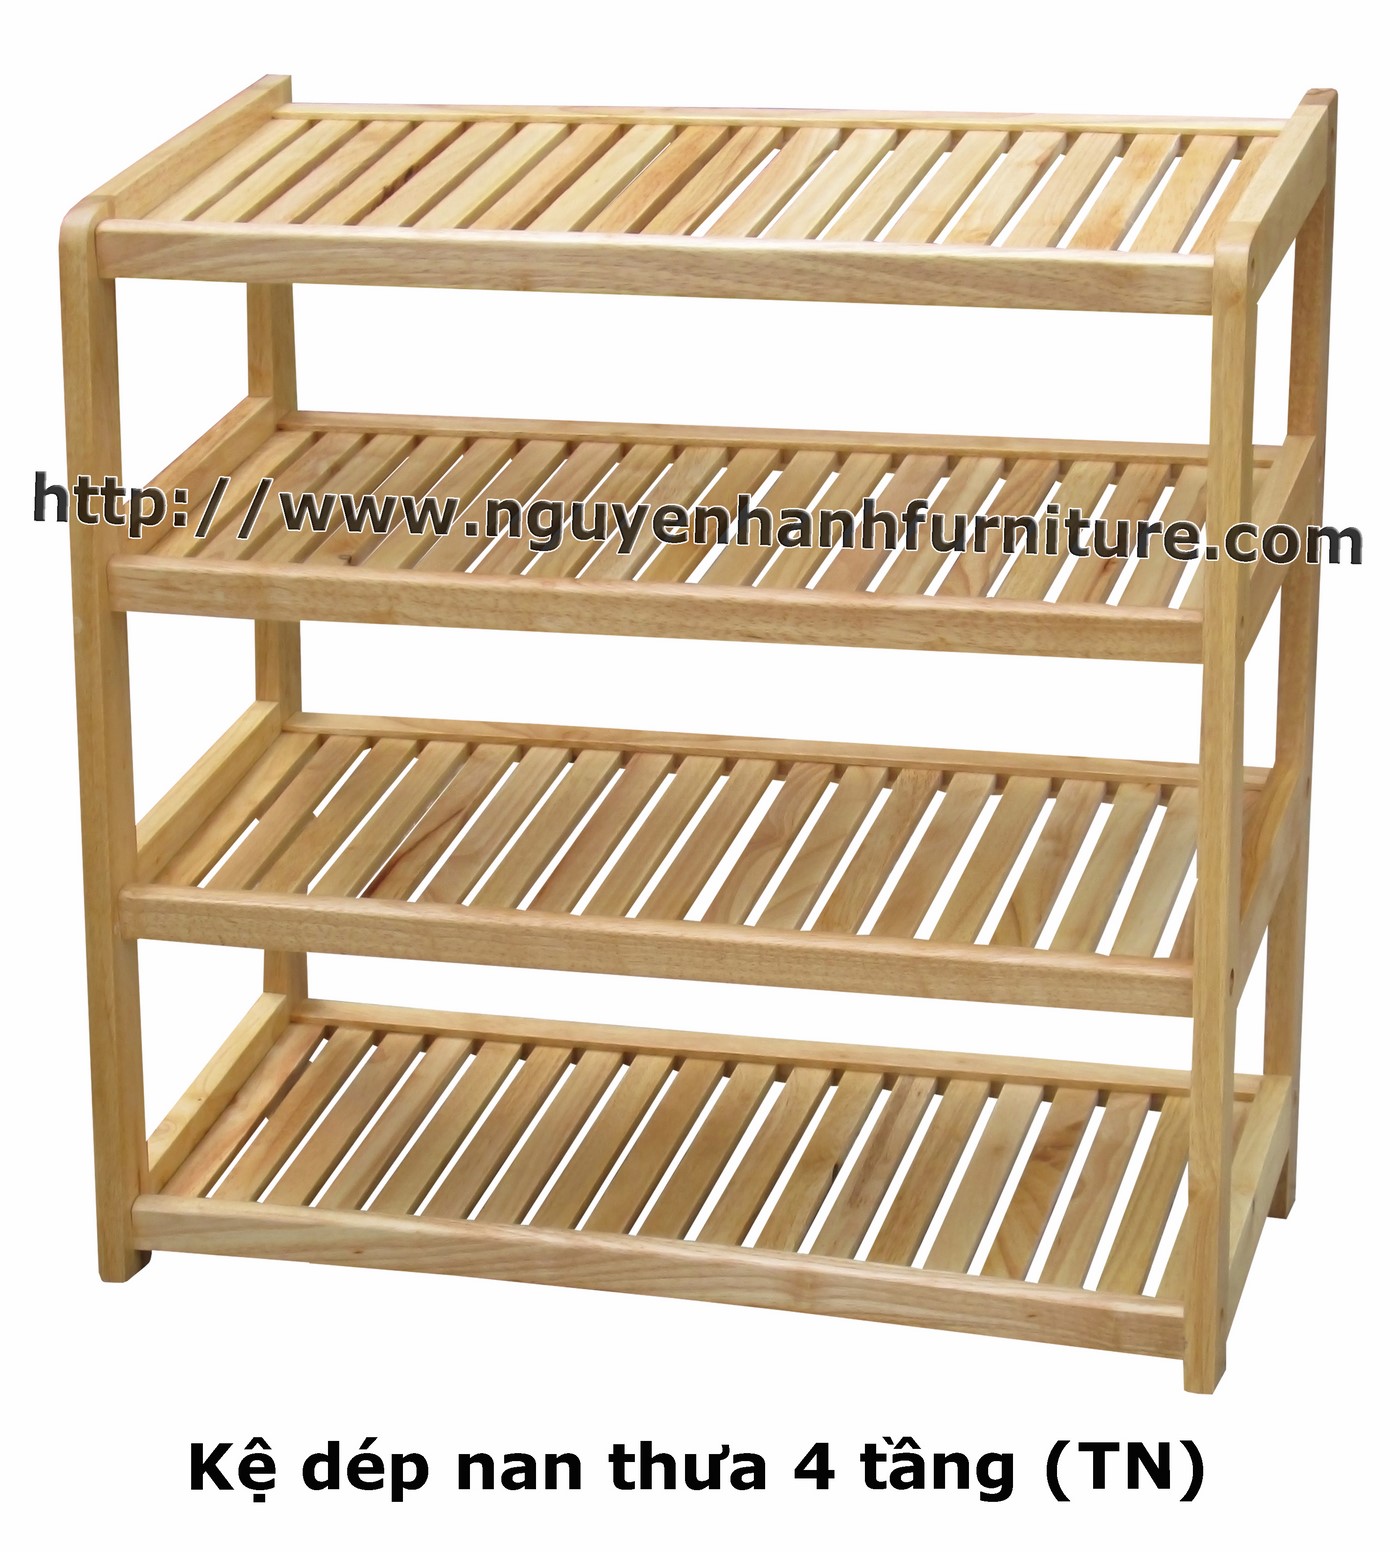 Name product: Shoeshelf 4 Floors with sparse blades (Natural) - Dimensions: 62 x 30 x 45 (H) - Description: Wood natural rubber